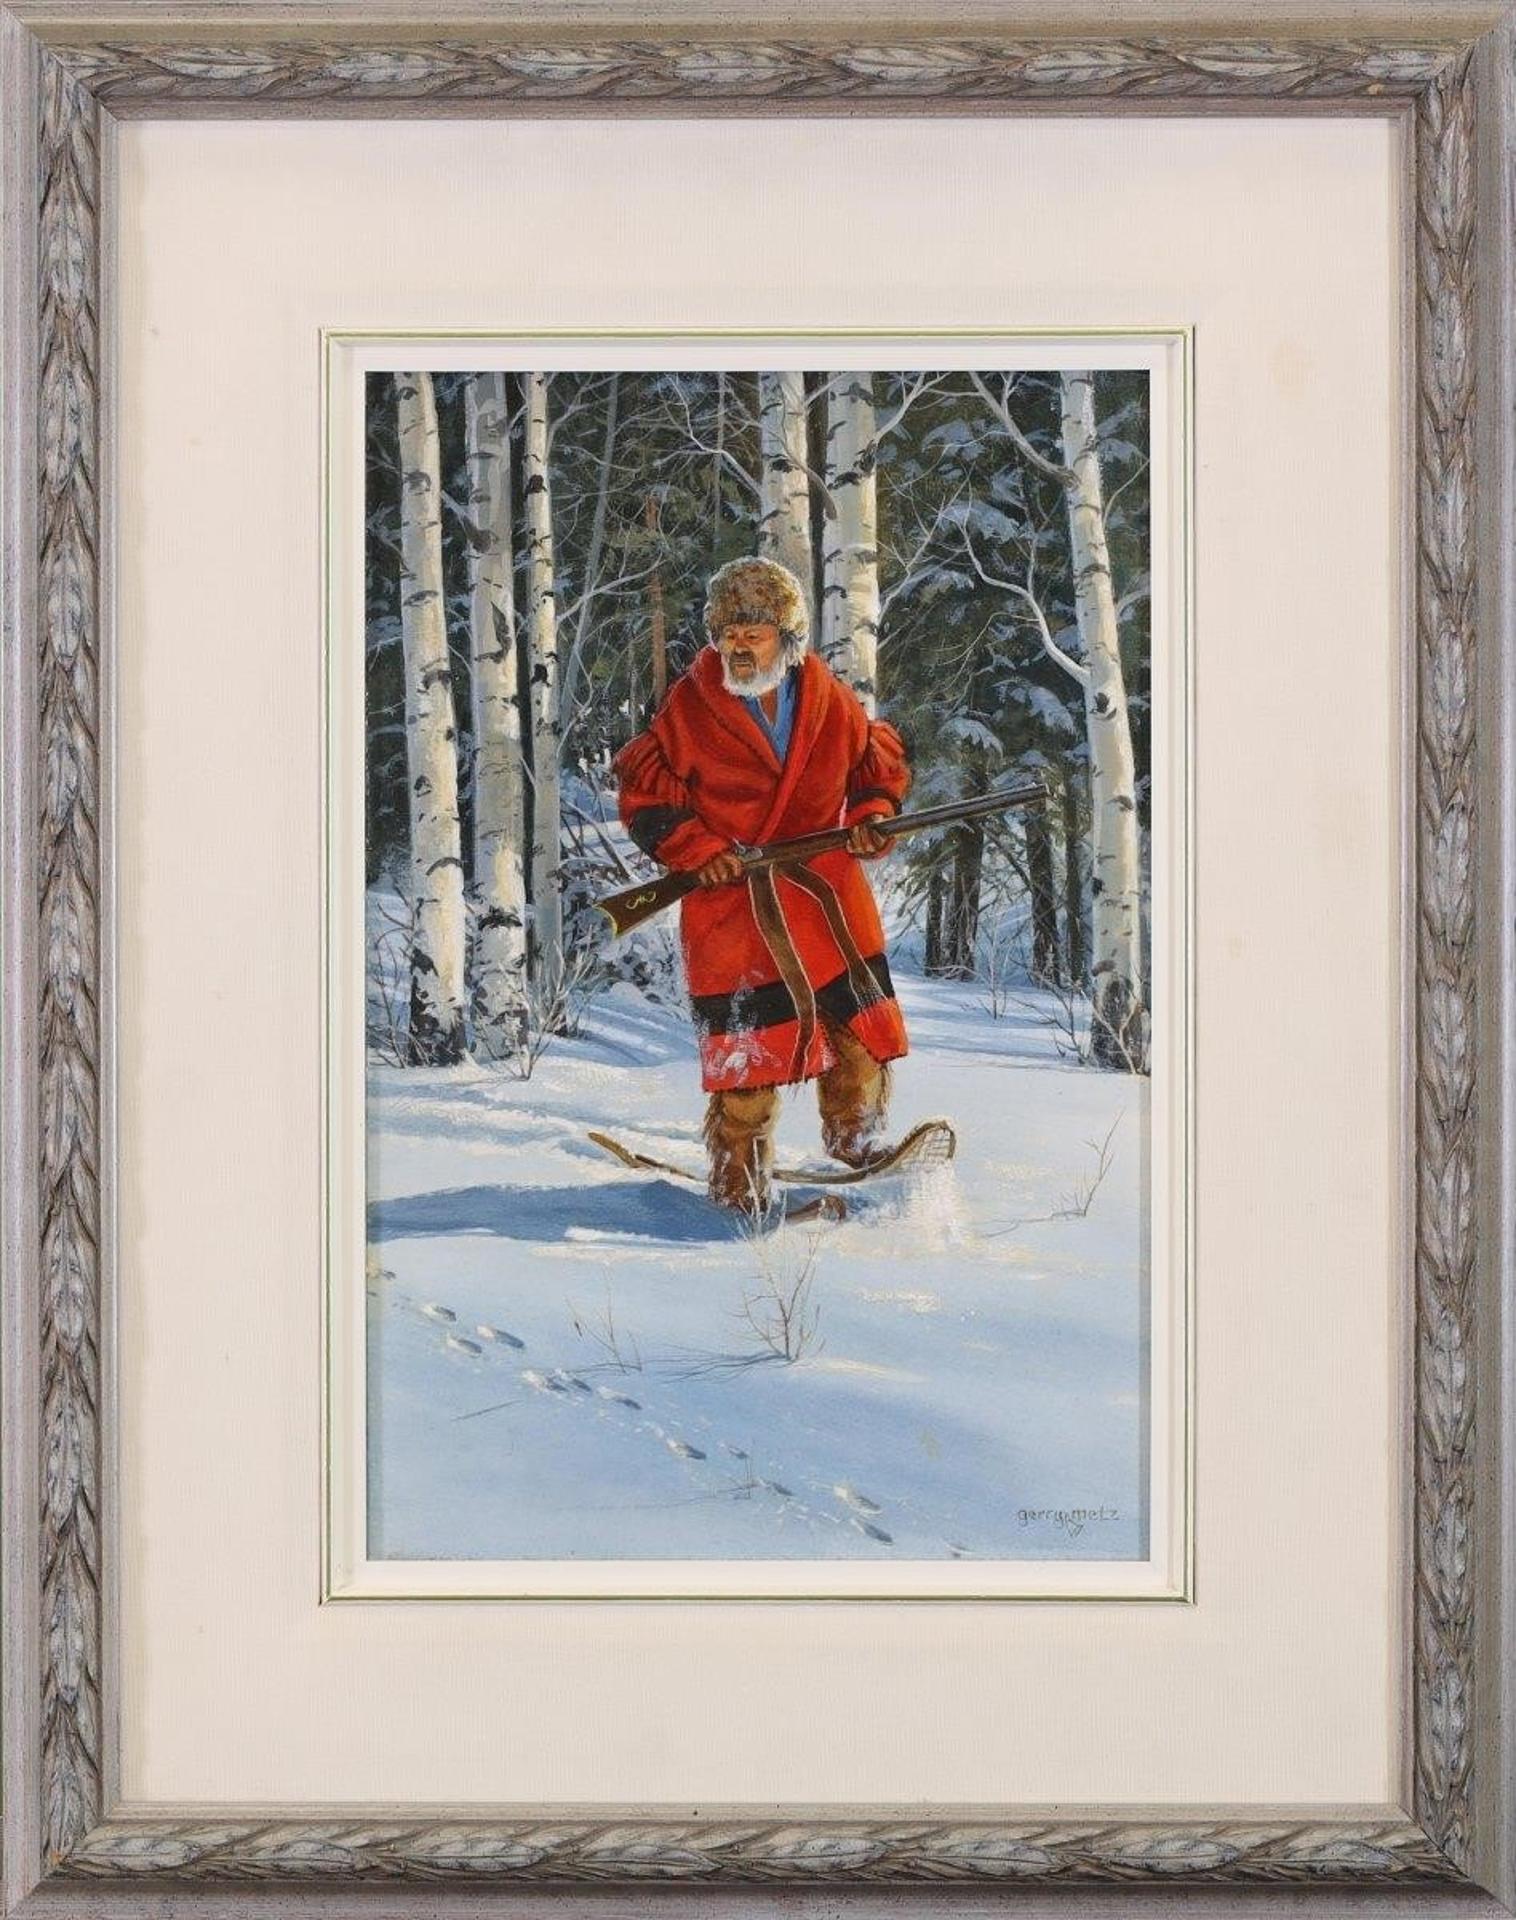 Gerry Michael Metz (1943) - Untitled, Hunter on Snowshoes